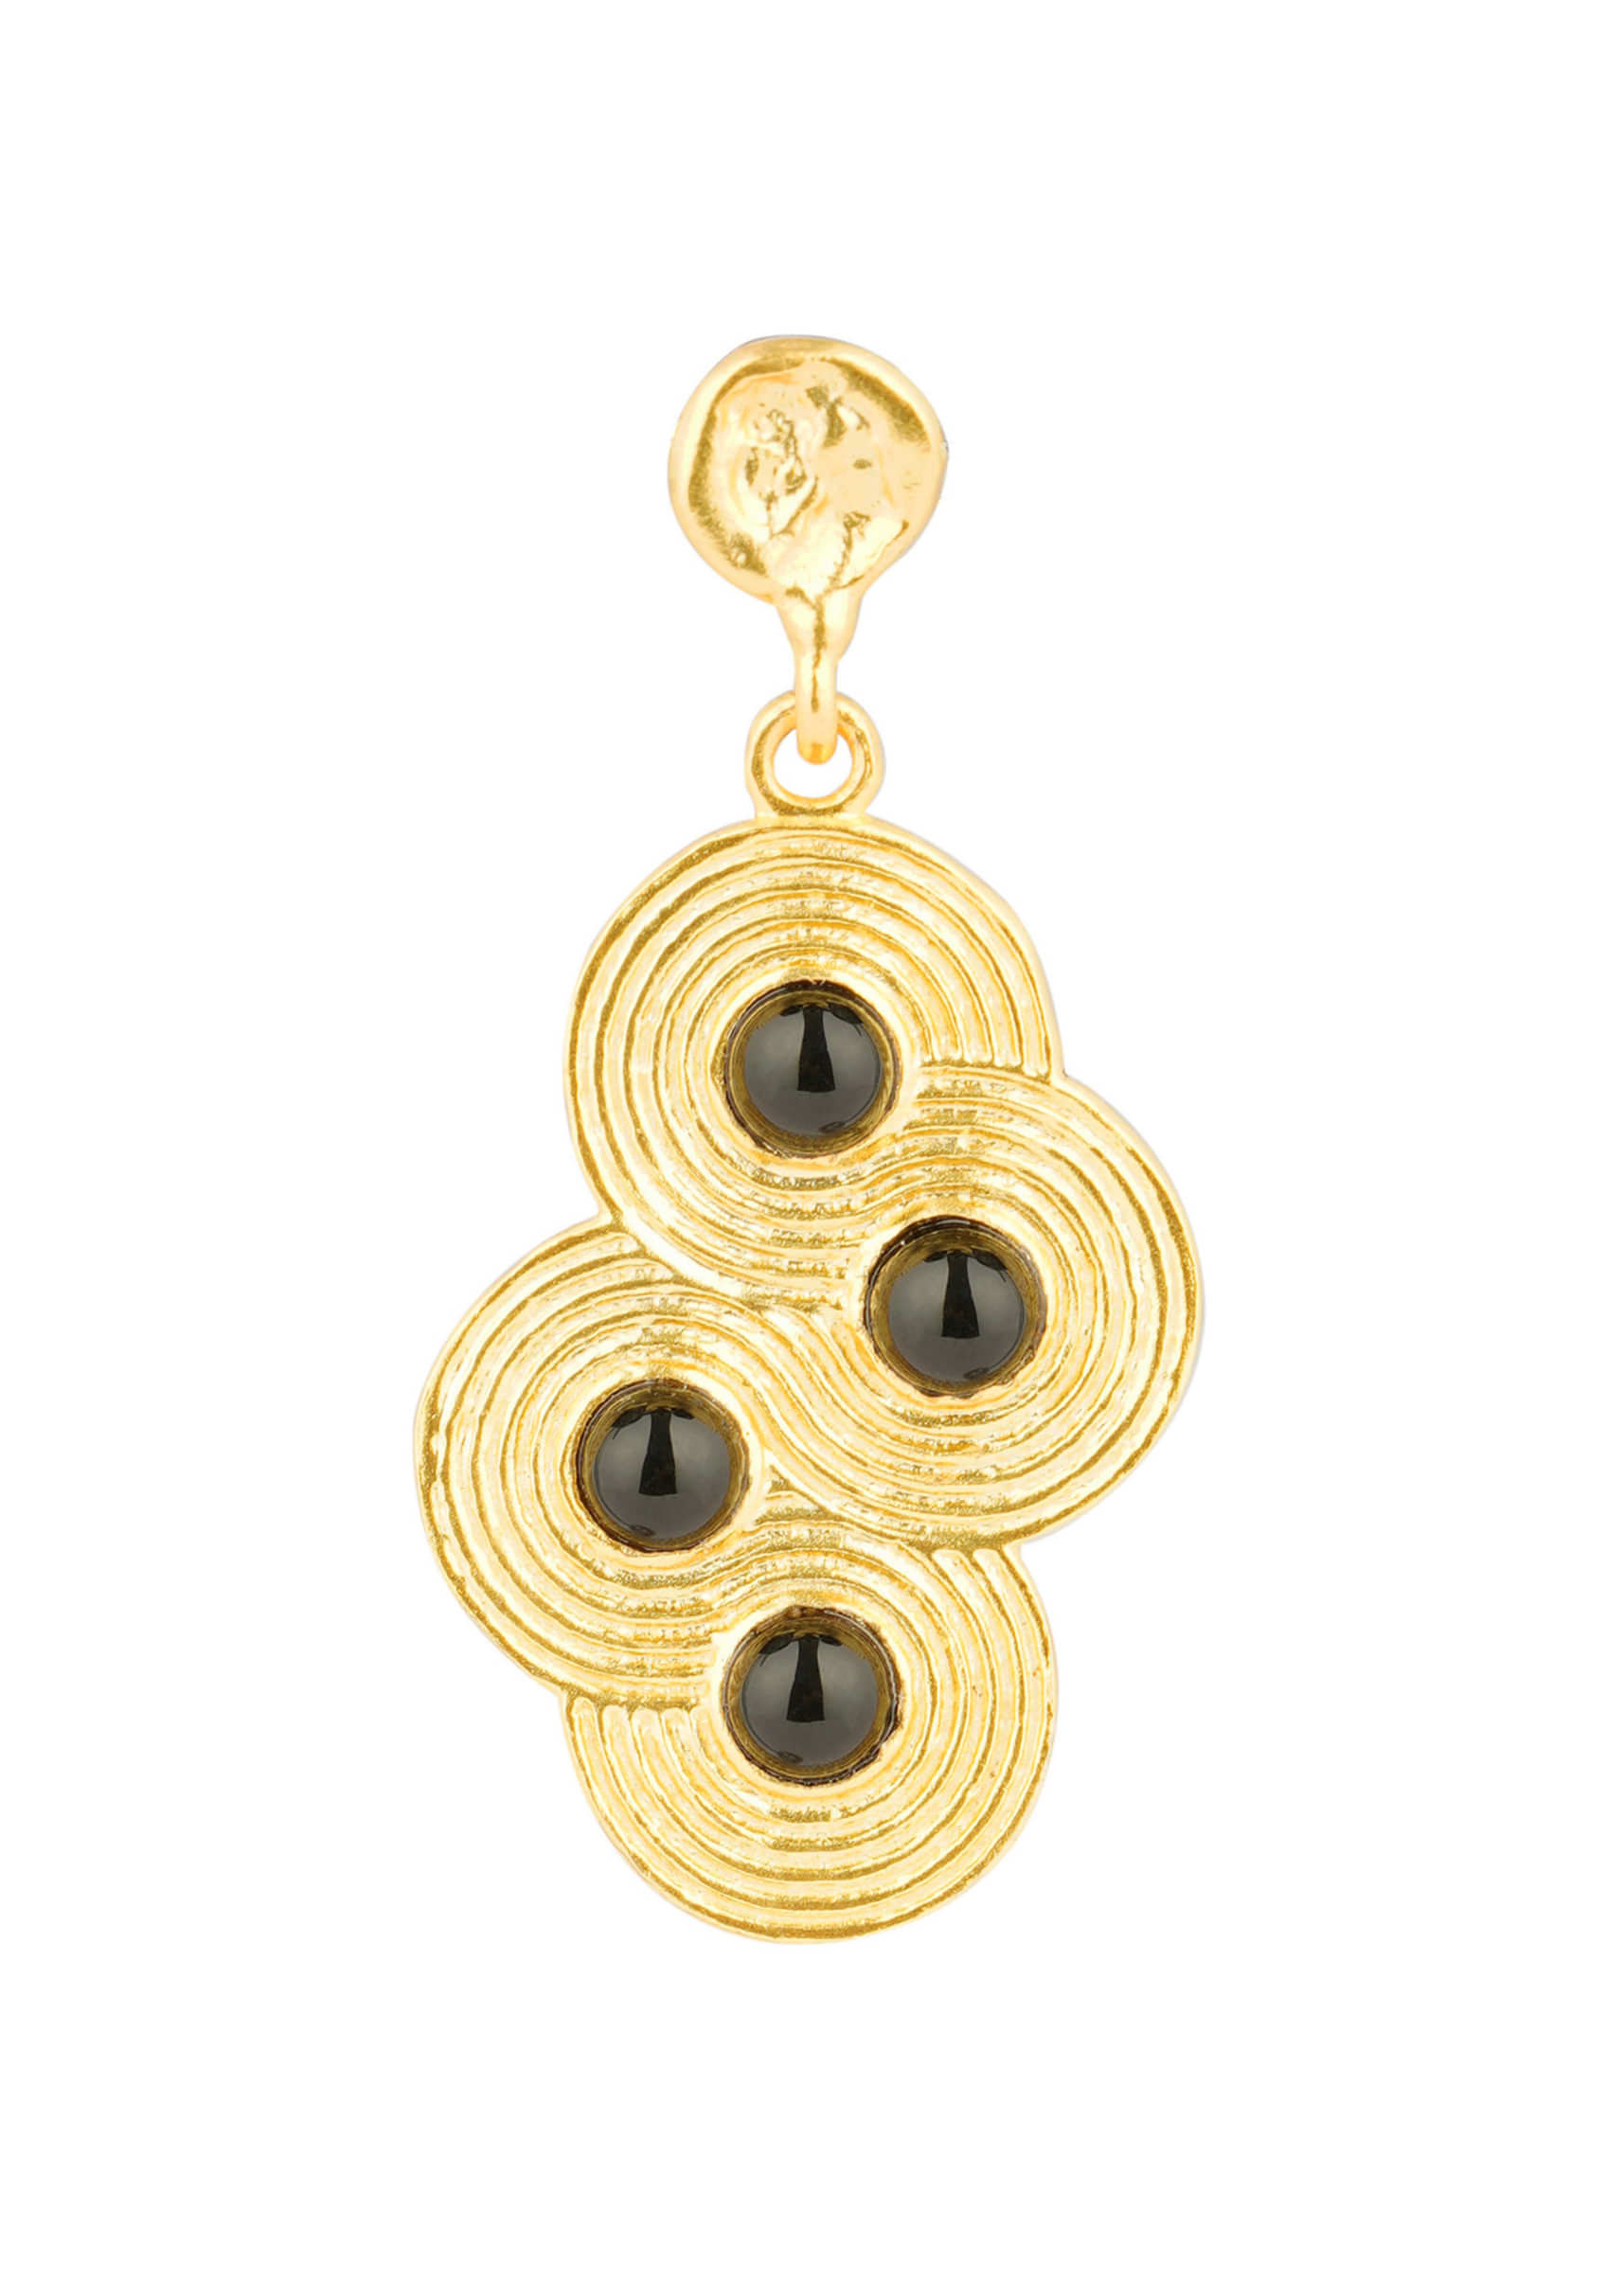 Gold Plated Designer Earrings Studded With Onyx Stones